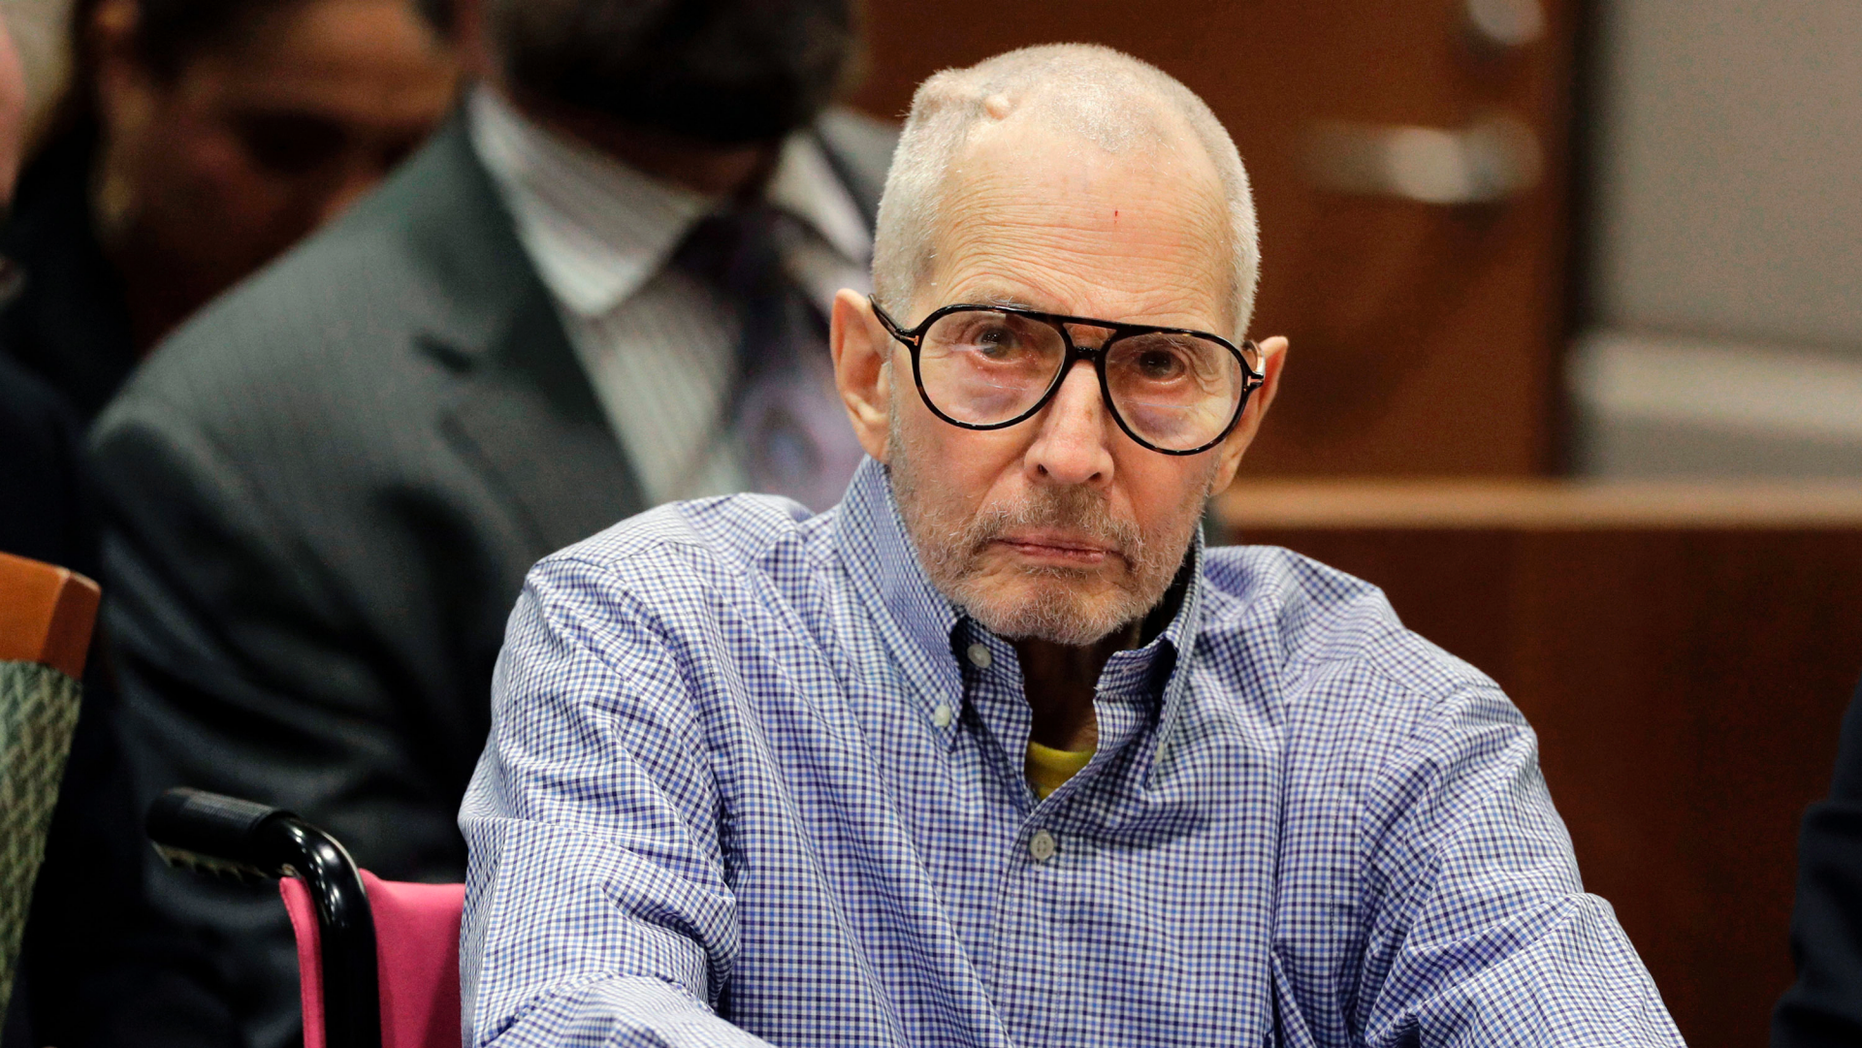 DOSSIER - In this archive photo of December 21, 2016, Robert Durst is sitting in a courtroom in Los Angeles. Robert Durst, the New York estate heir, faces a new lawsuit that claims to have killed his first wife and got rid of his body in 1982. A sister of Kathleen Durst filed a complaint for wrongful death on Friday 22 March 2019, accusing Durst of killing the woman in their suburban home in New York. (AP Photo / Jae C. Hong, Pool, File)